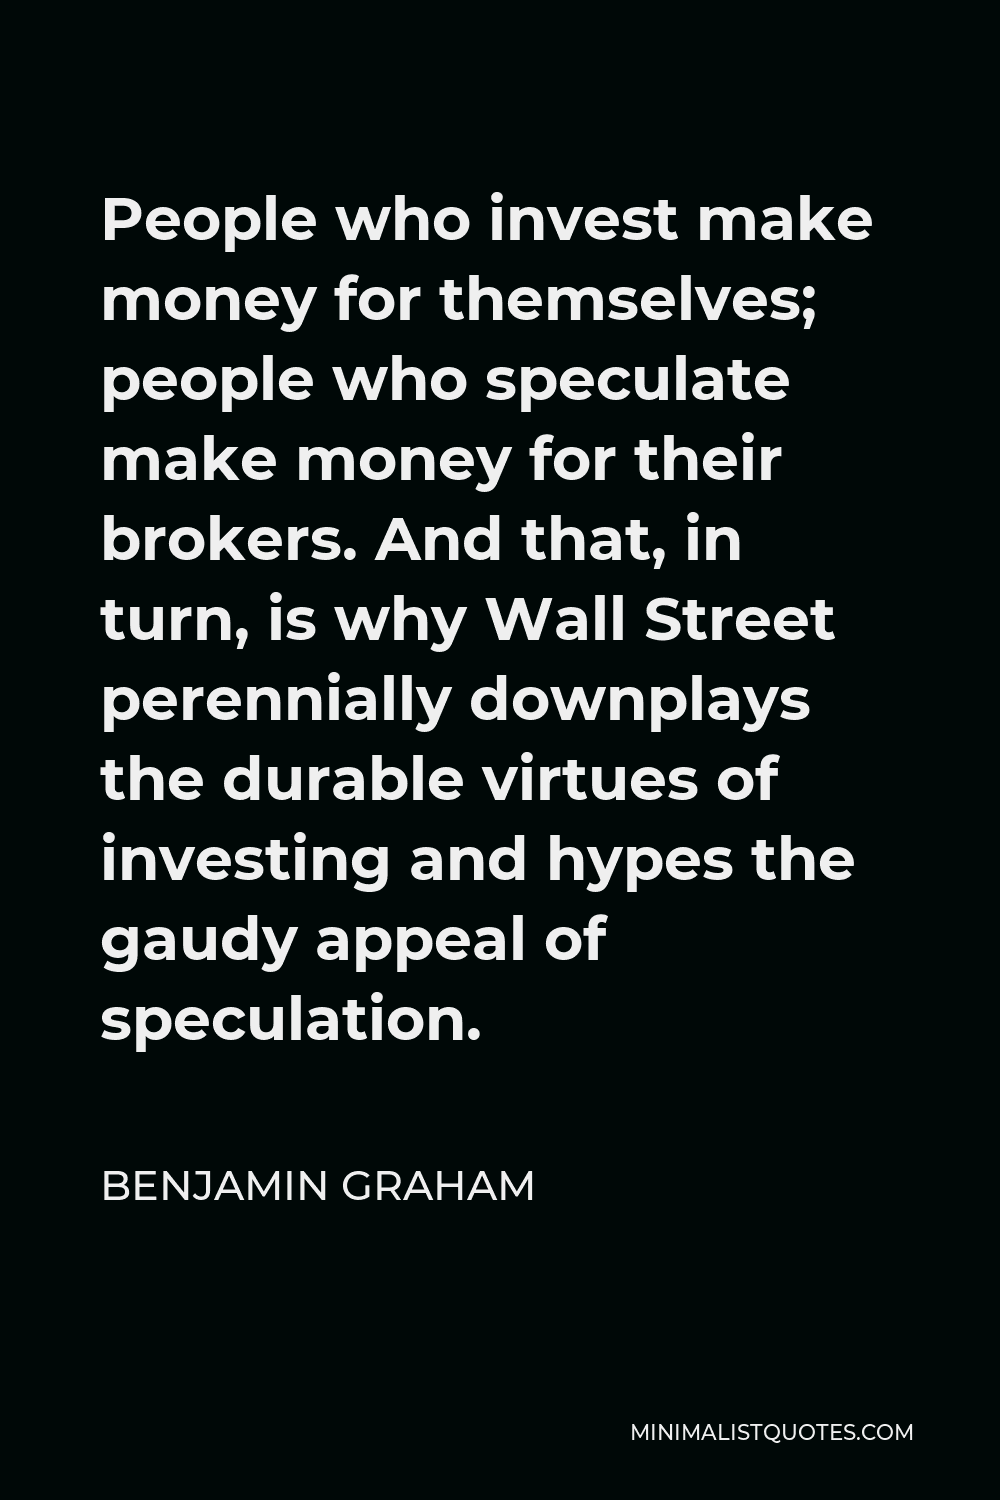 Benjamin Graham Quote - People who invest make money for themselves; people who speculate make money for their brokers. And that, in turn, is why Wall Street perennially downplays the durable virtues of investing and hypes the gaudy appeal of speculation.